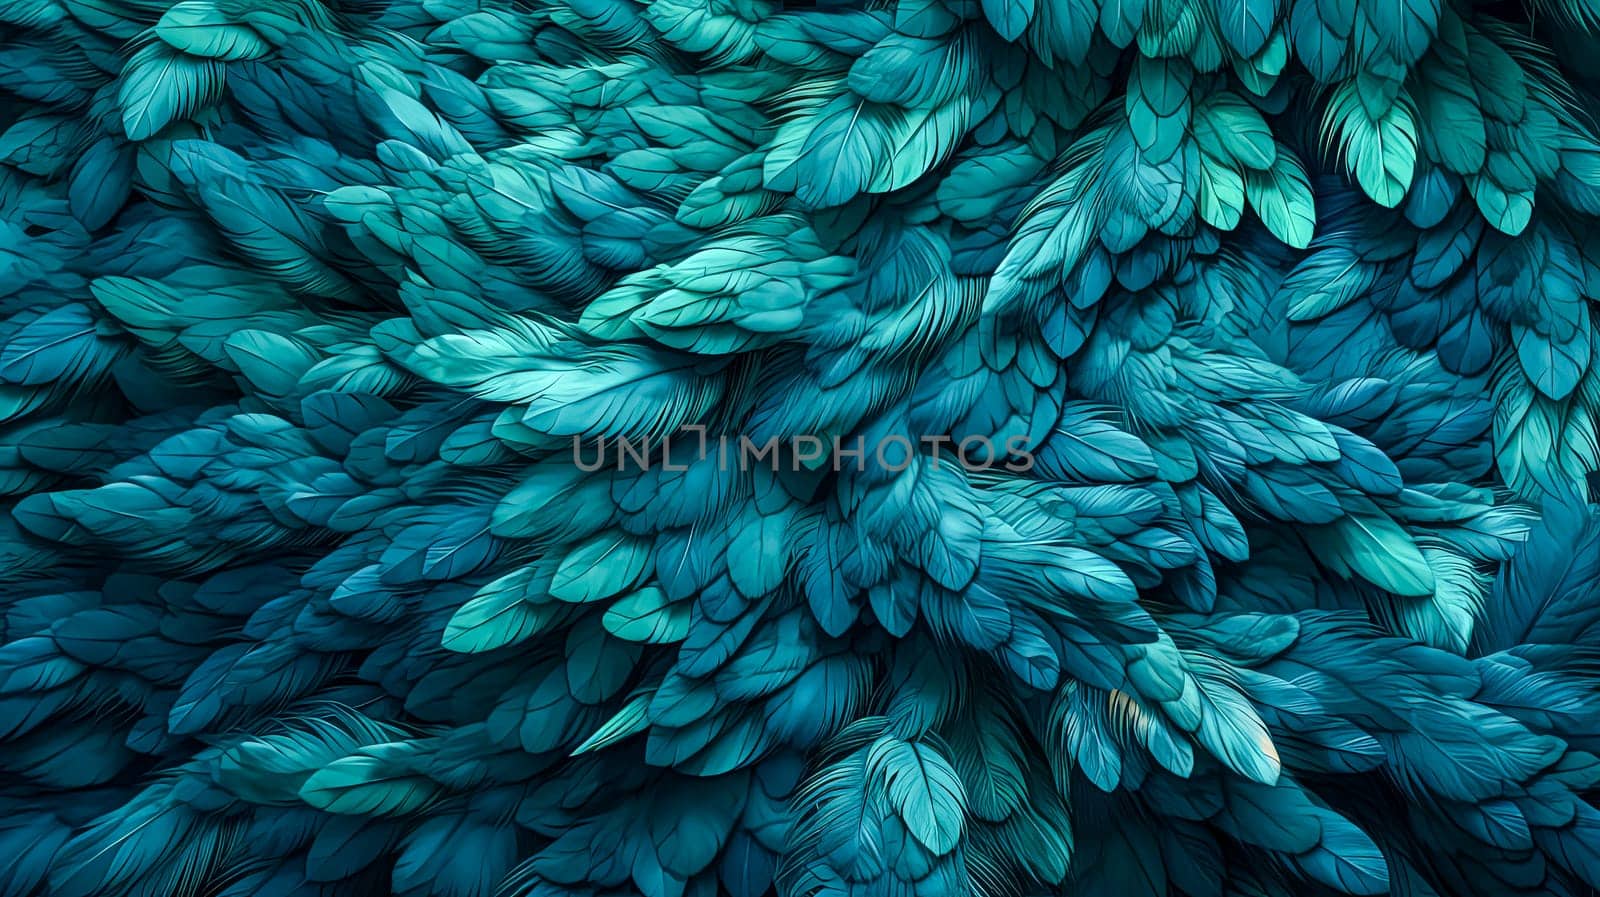 A blue and green feathery background with a lot of feathers by Alla_Morozova93